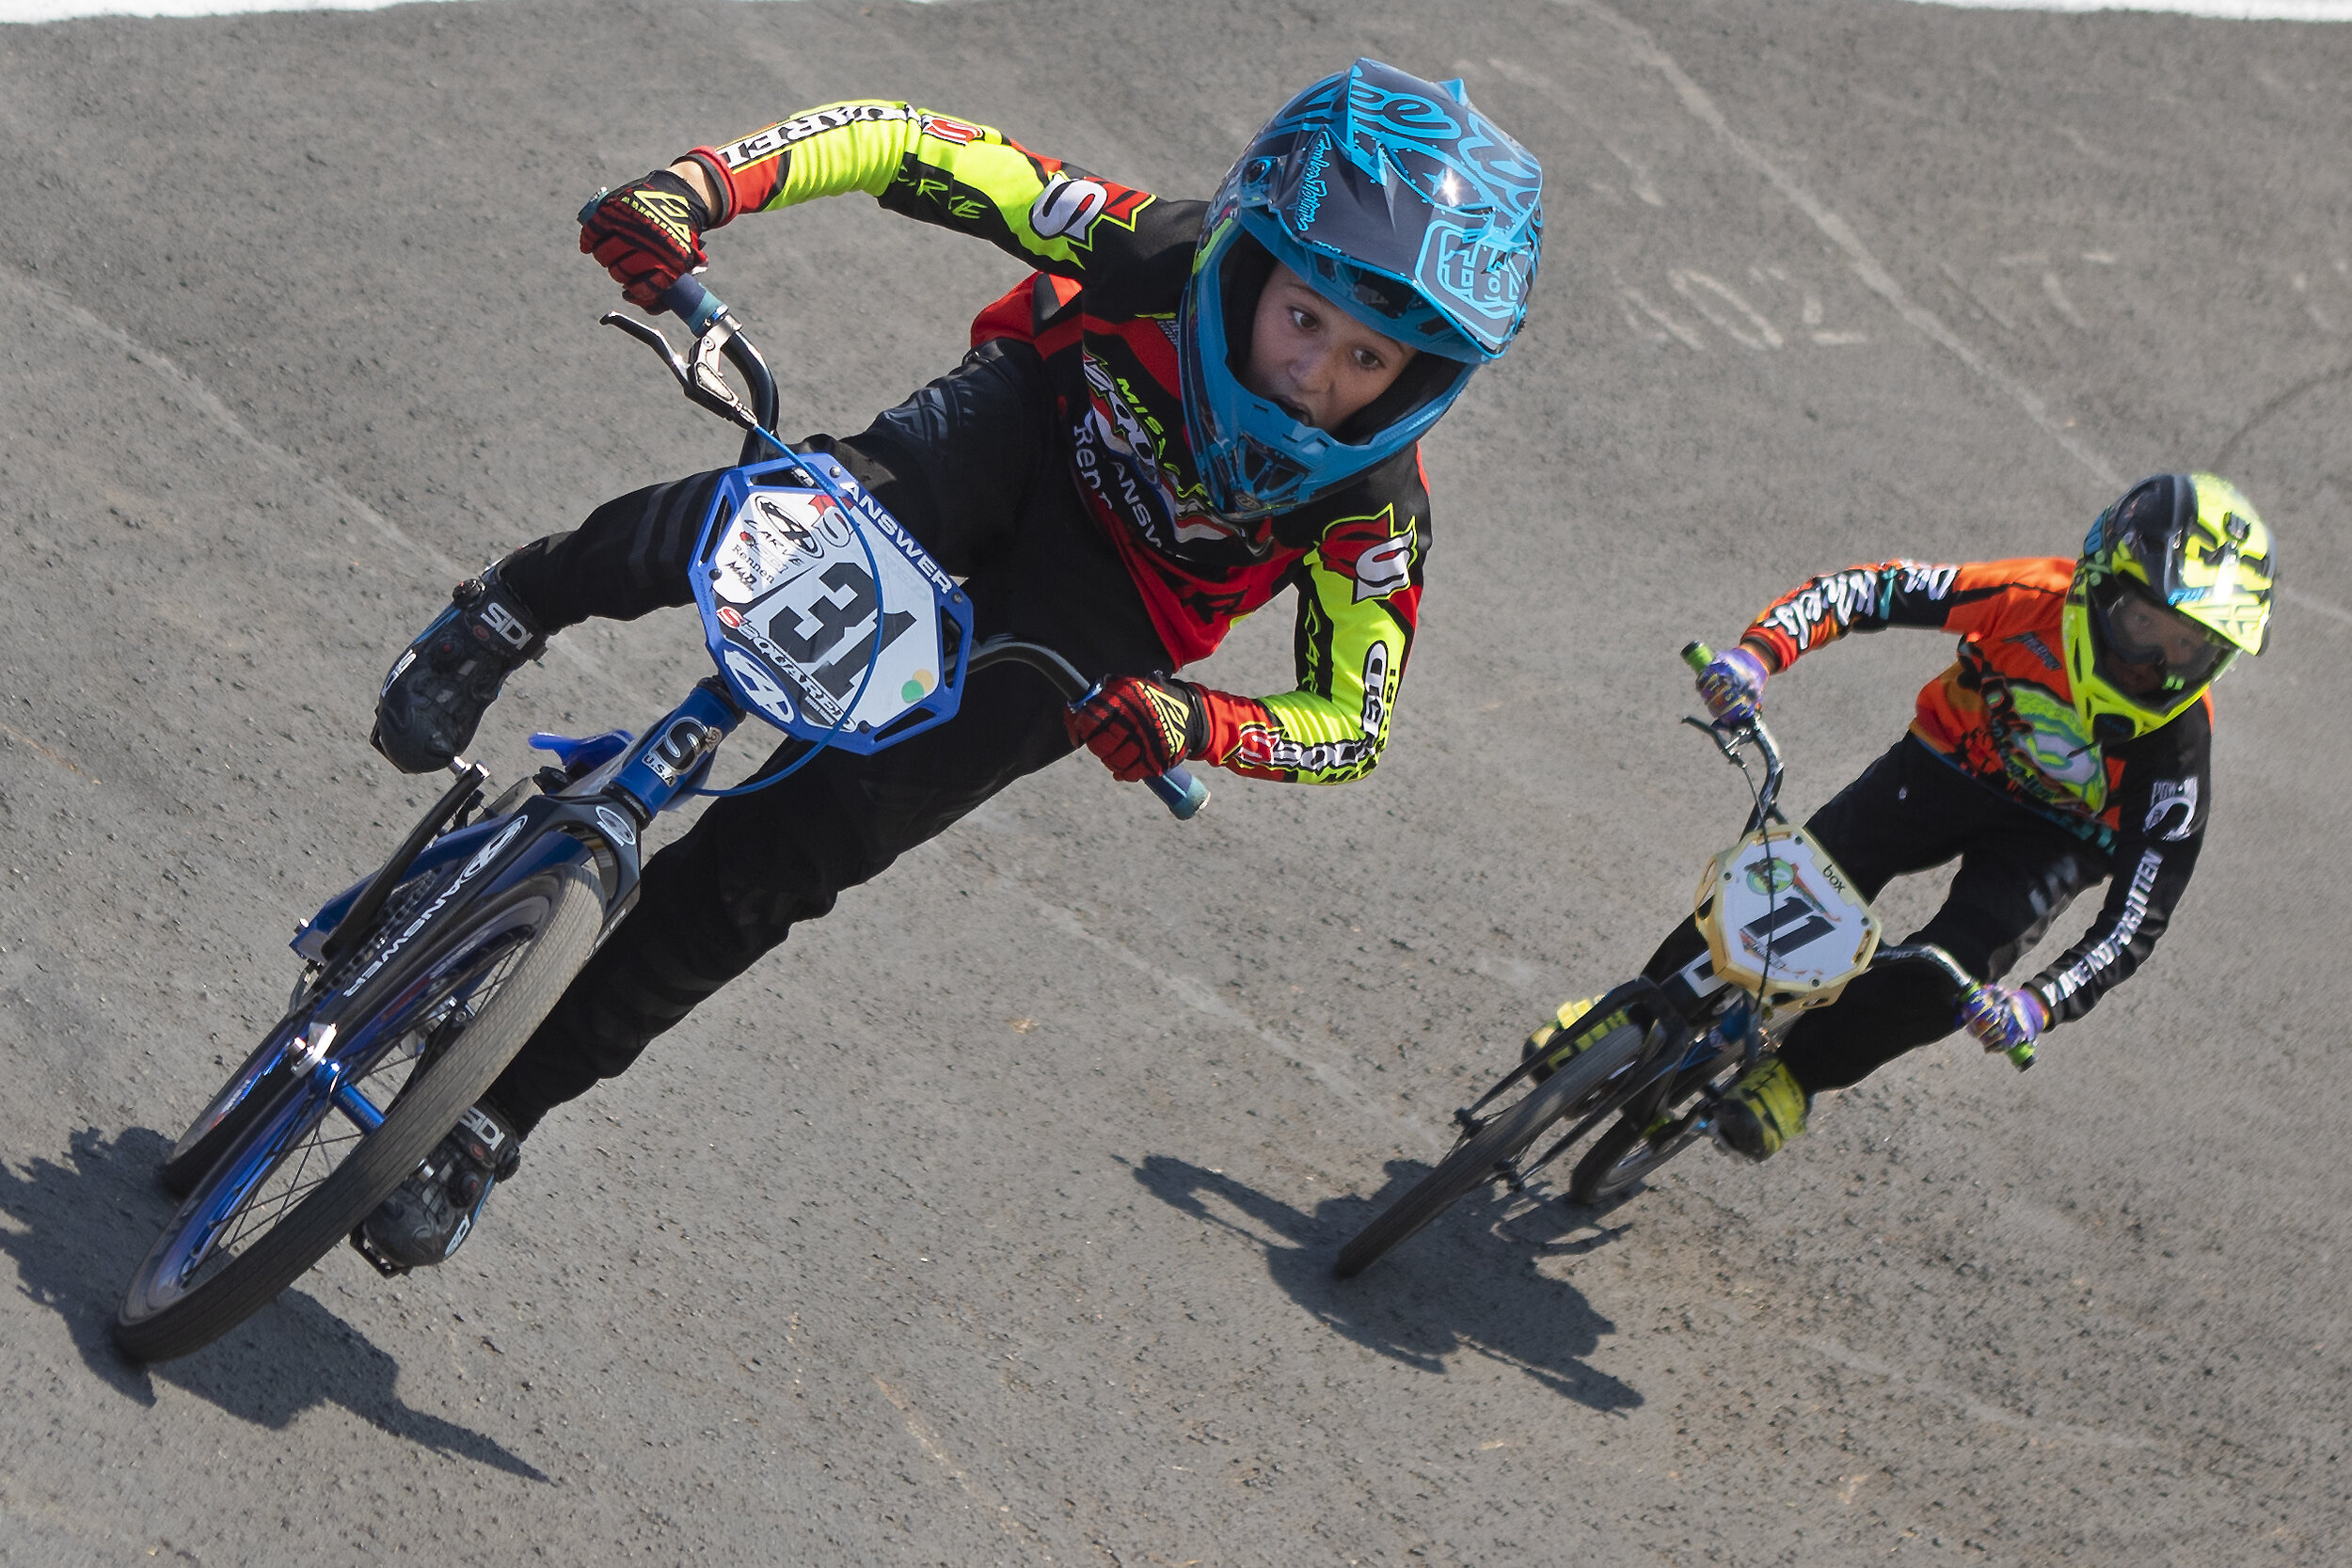  Logun Meyer (left)  and Jenson Koll race around the corner of the Star City BMX track during the 13 intermediate race at the BMX Cornhusker Nationals event on Sunday, August 23, 2020, in Lincoln, Nebraska. KENNETH FERRIERA, Journal Star.  